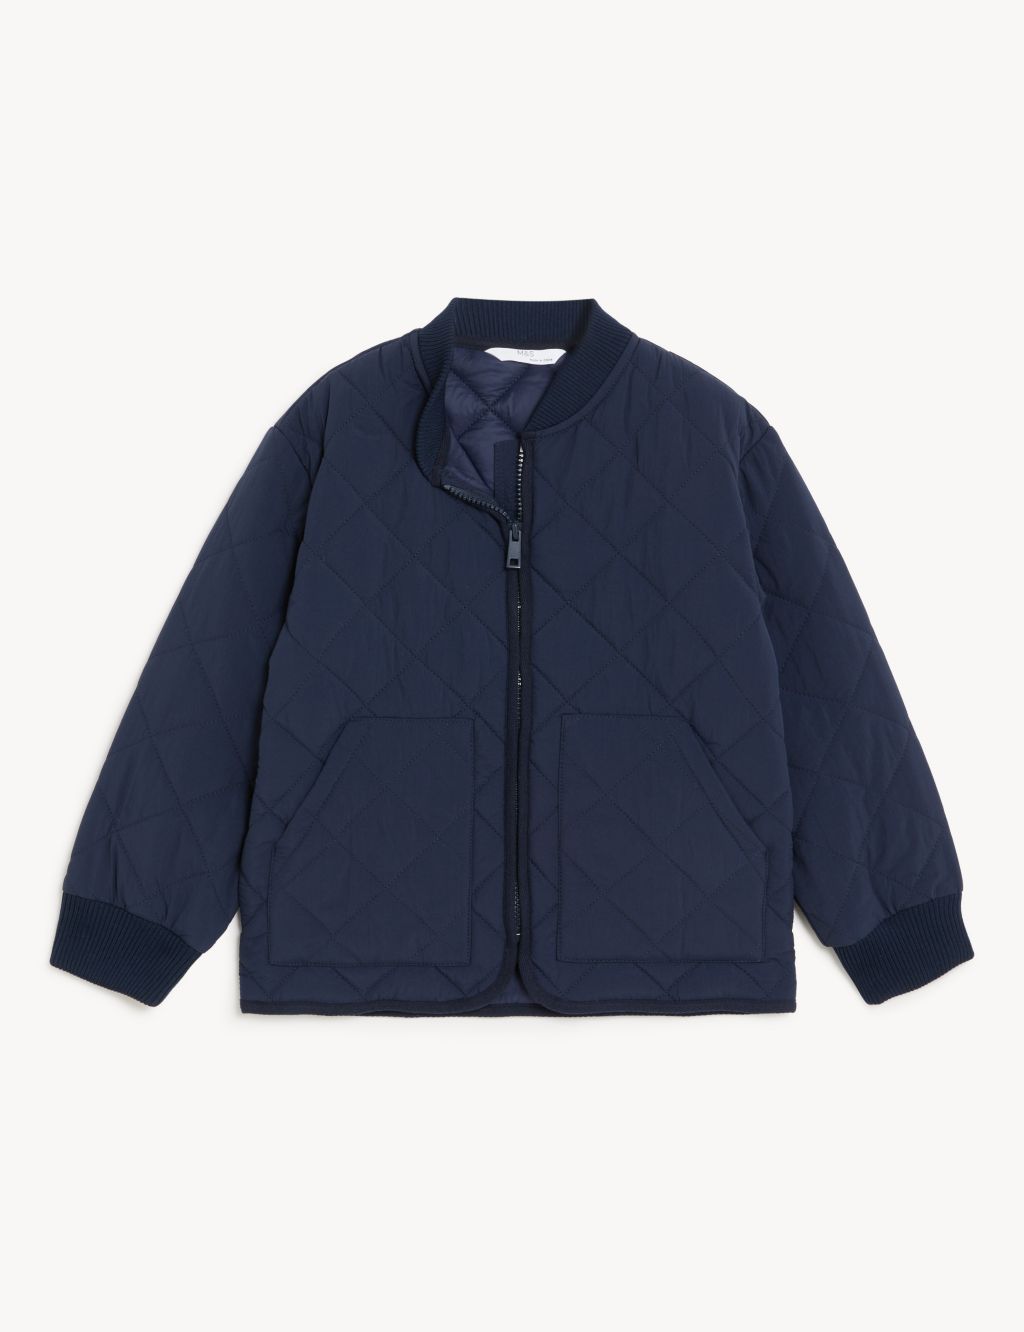 Stormwear™ Quilted Bomber (6 - 16 Yrs) image 1